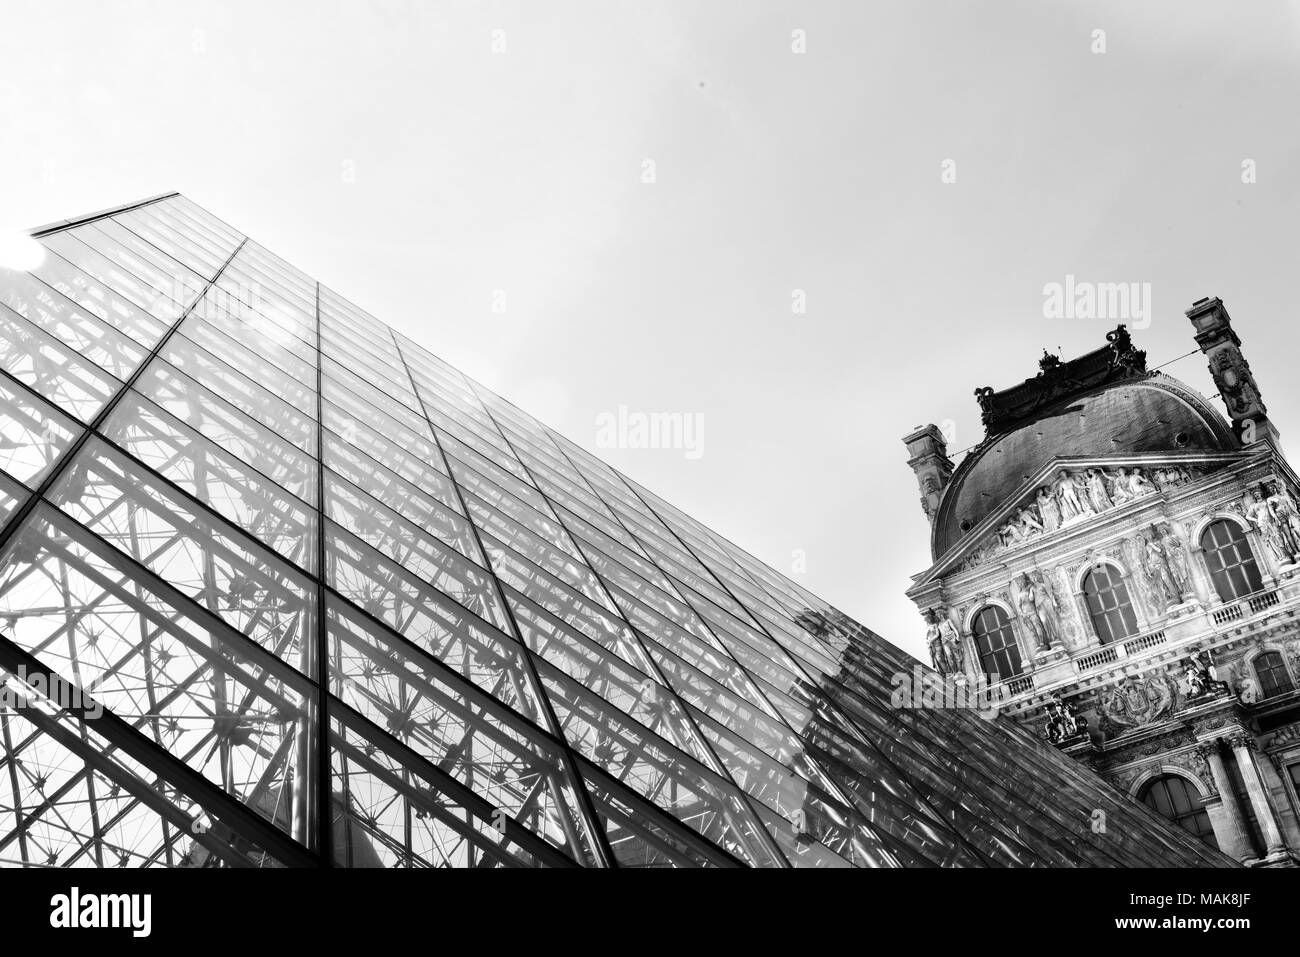 The glass pyramid of the Louvre and part of the Royal Palace in black and white Stock Photo